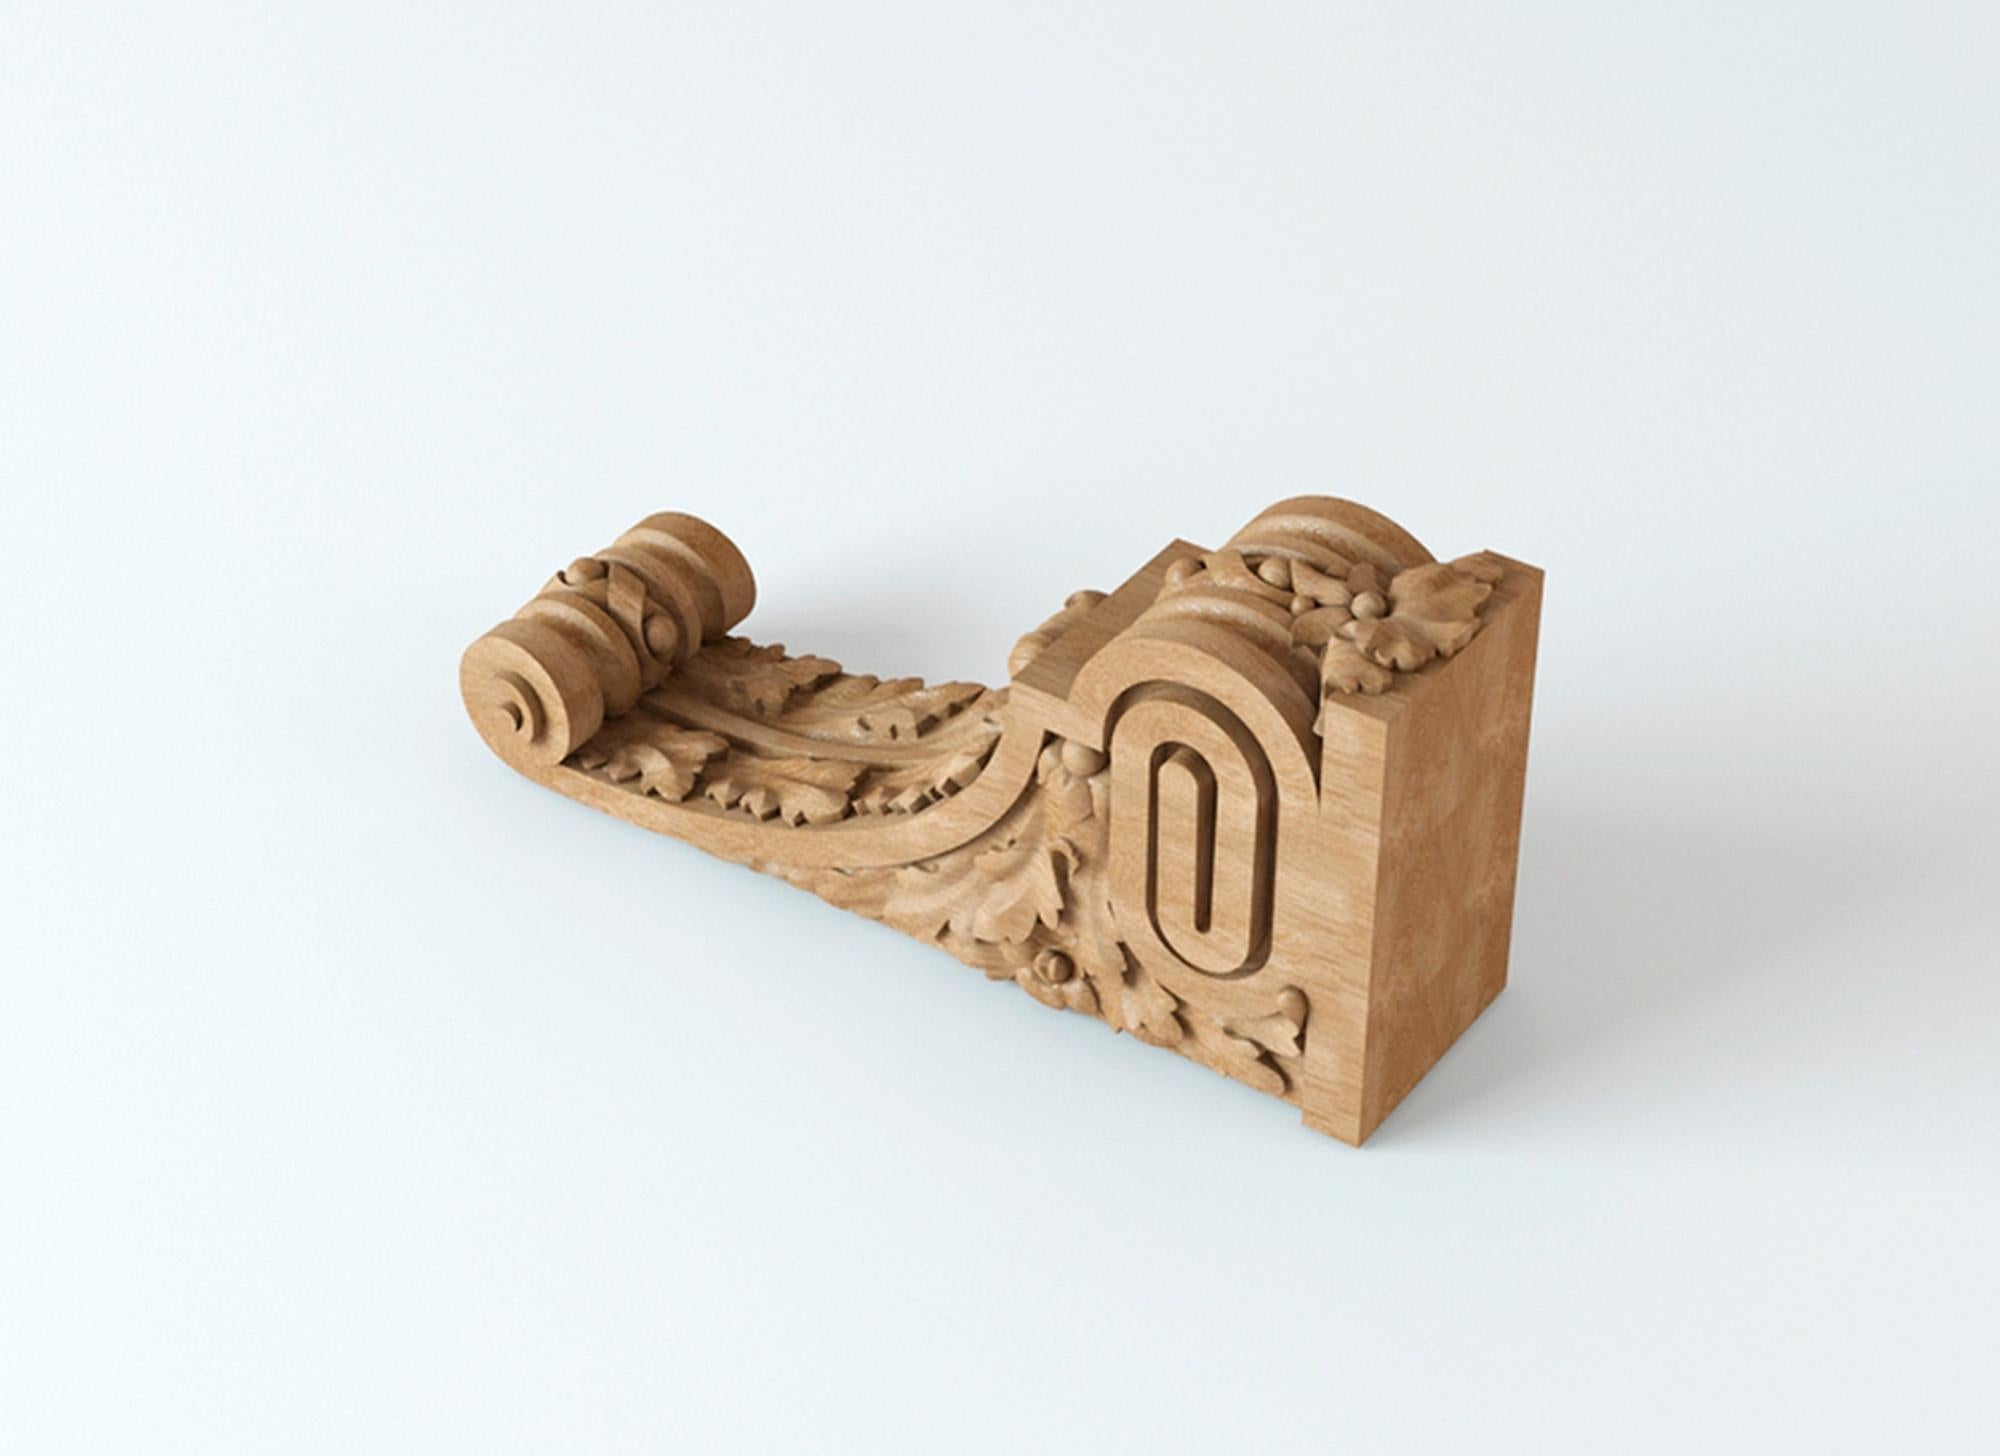 High-quality unfinished carved wooden corbel. Unpainted.

>> SKU: KR-056

>> Dimensions (A x B x C x d x e):

1) 9.09